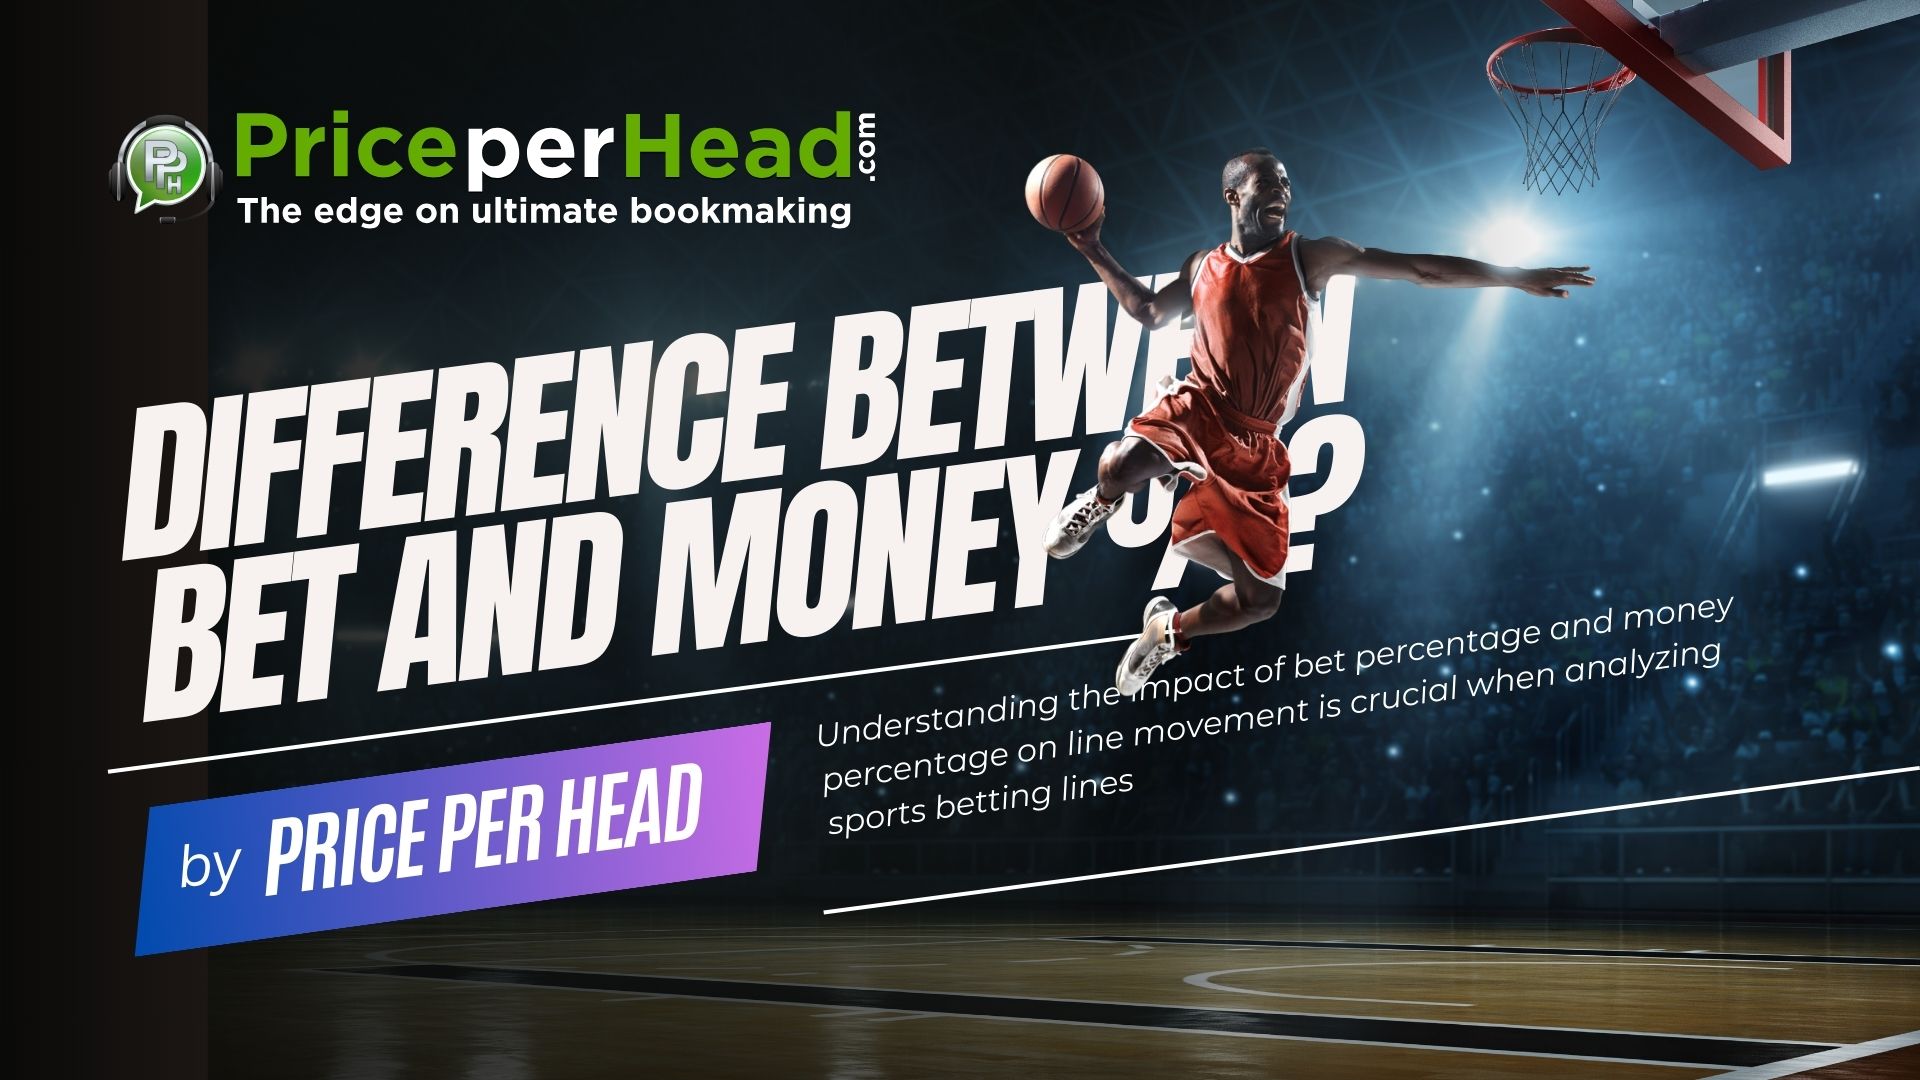 dfference between bet and money percentage, pay per head service, price per head